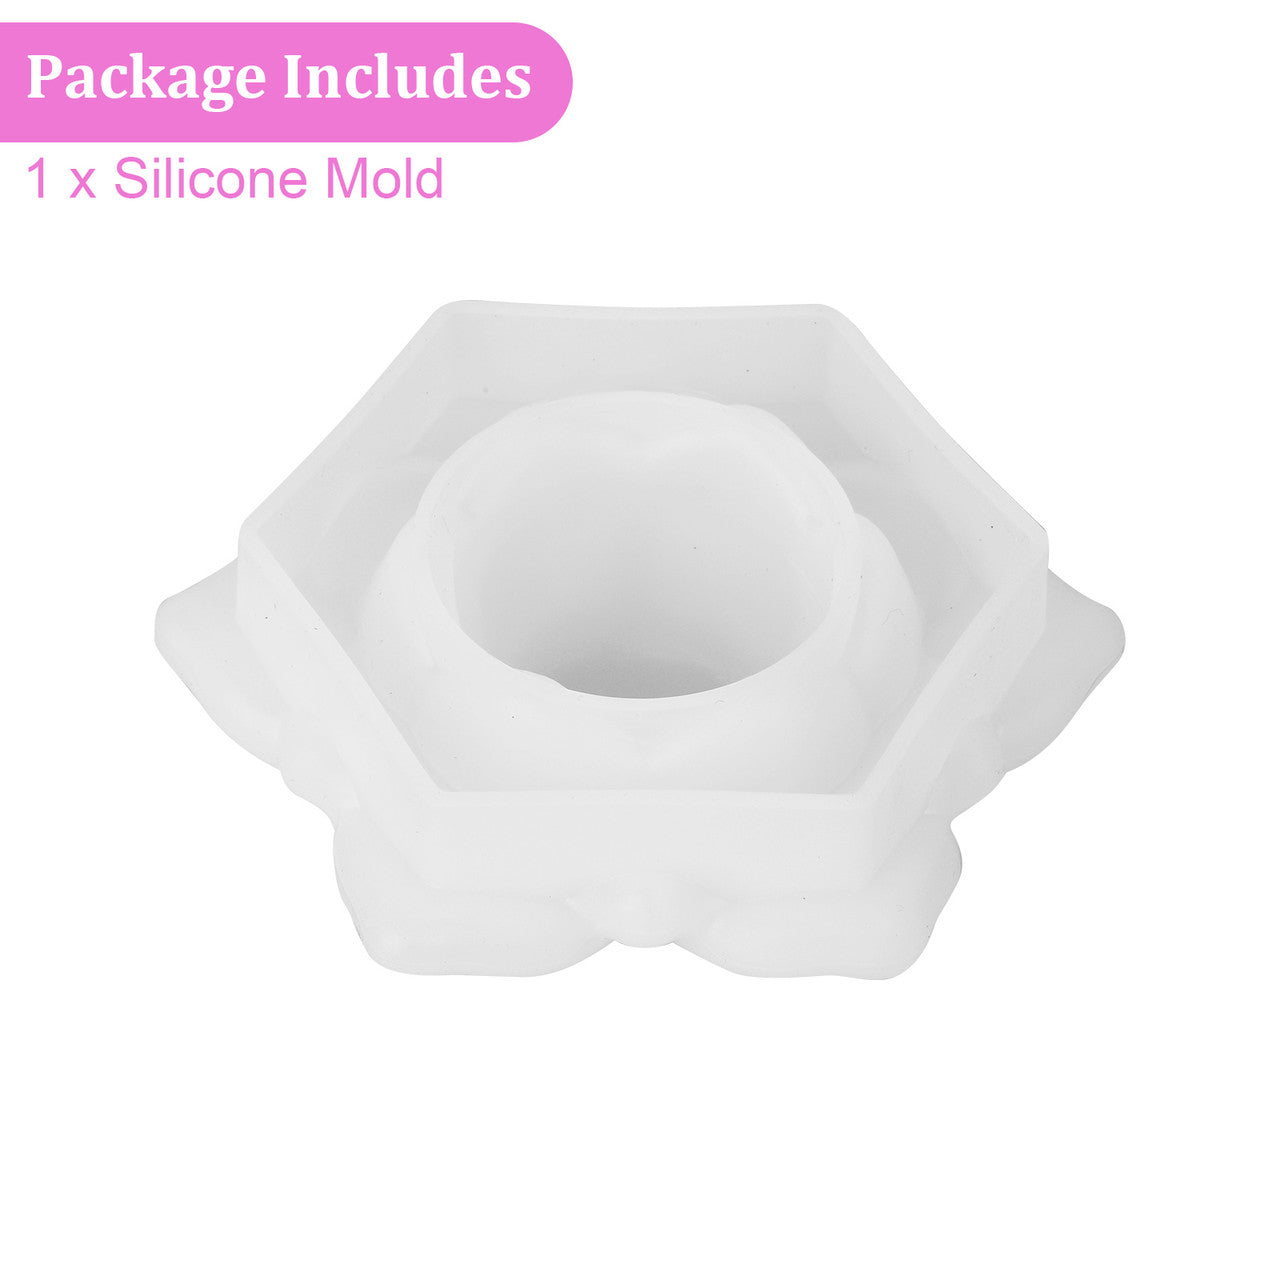 Lotus Flower Silicone Molds Candles Holders for DIY Candlestick, Jewelry Storage Box, Flower Pot, Candy Tray